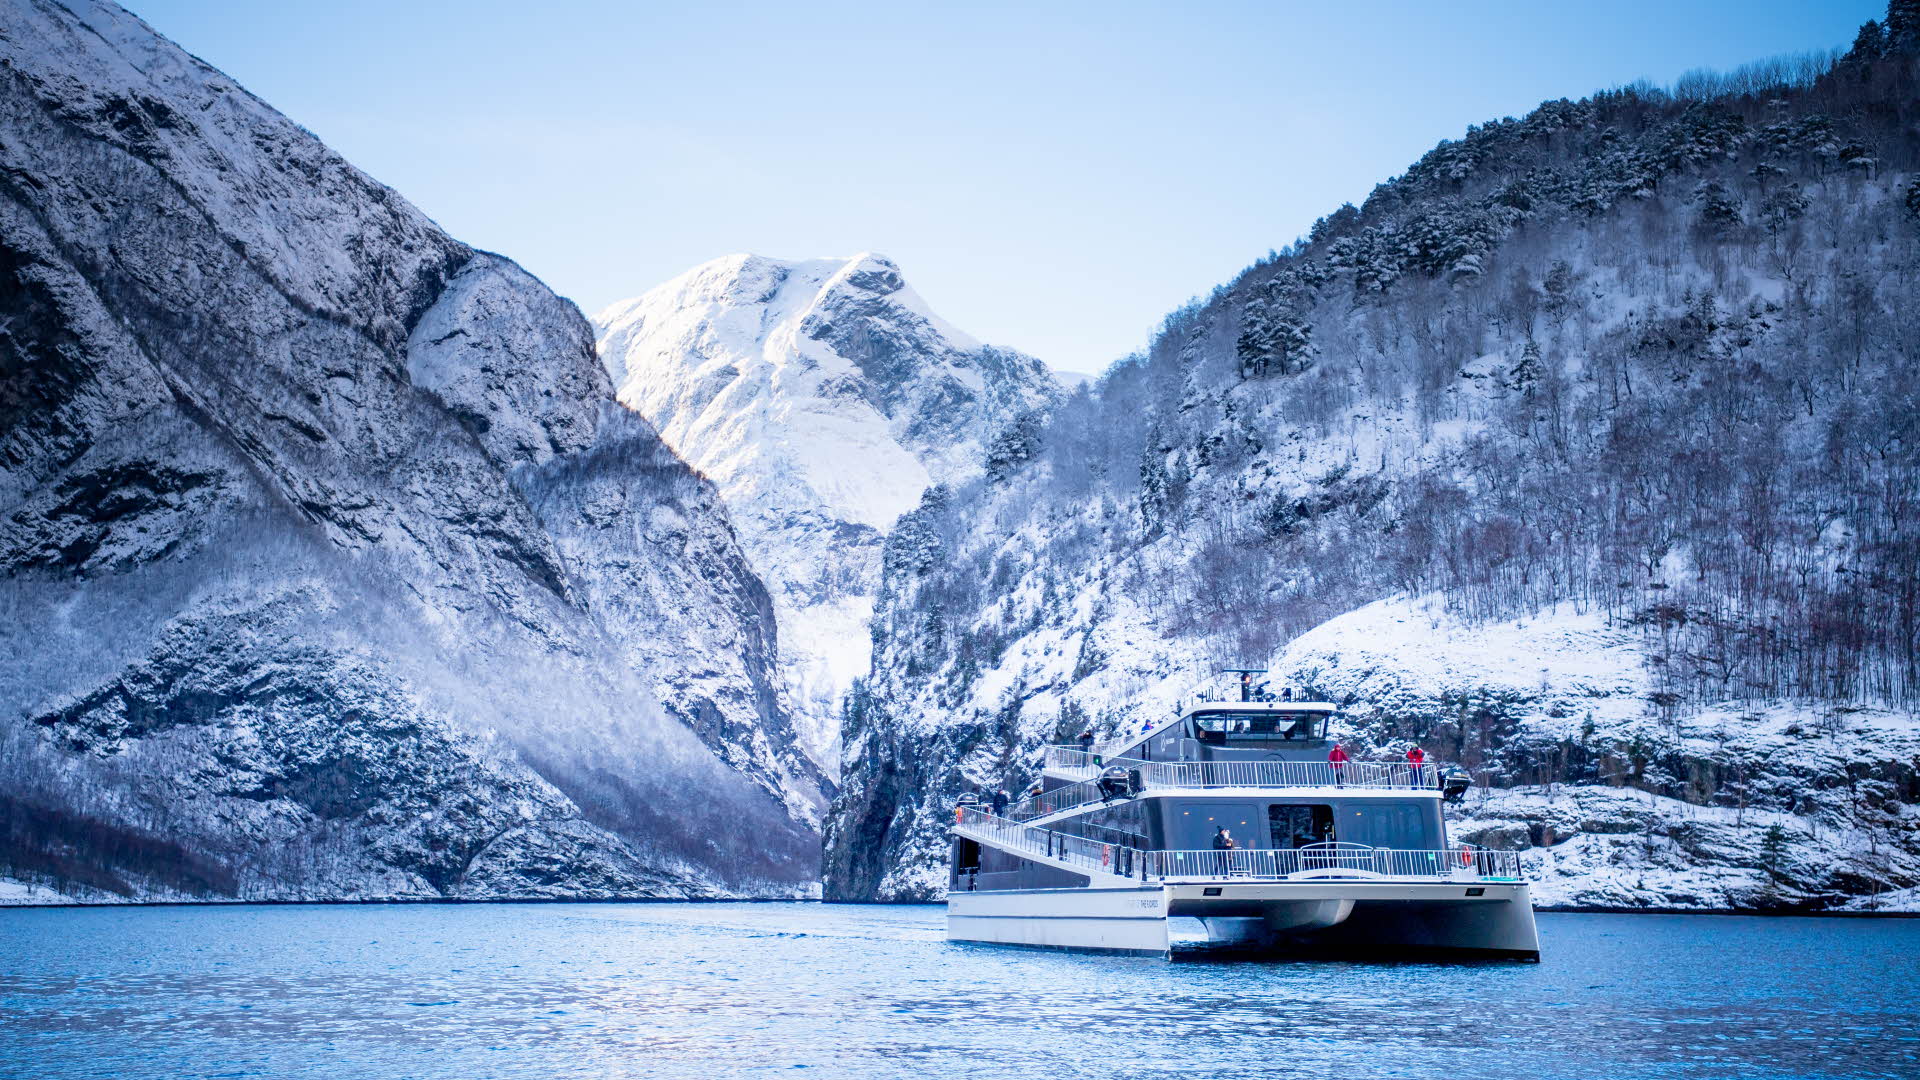 Electric catamaran on the Nærøyfjord in front of snow-covered mountains